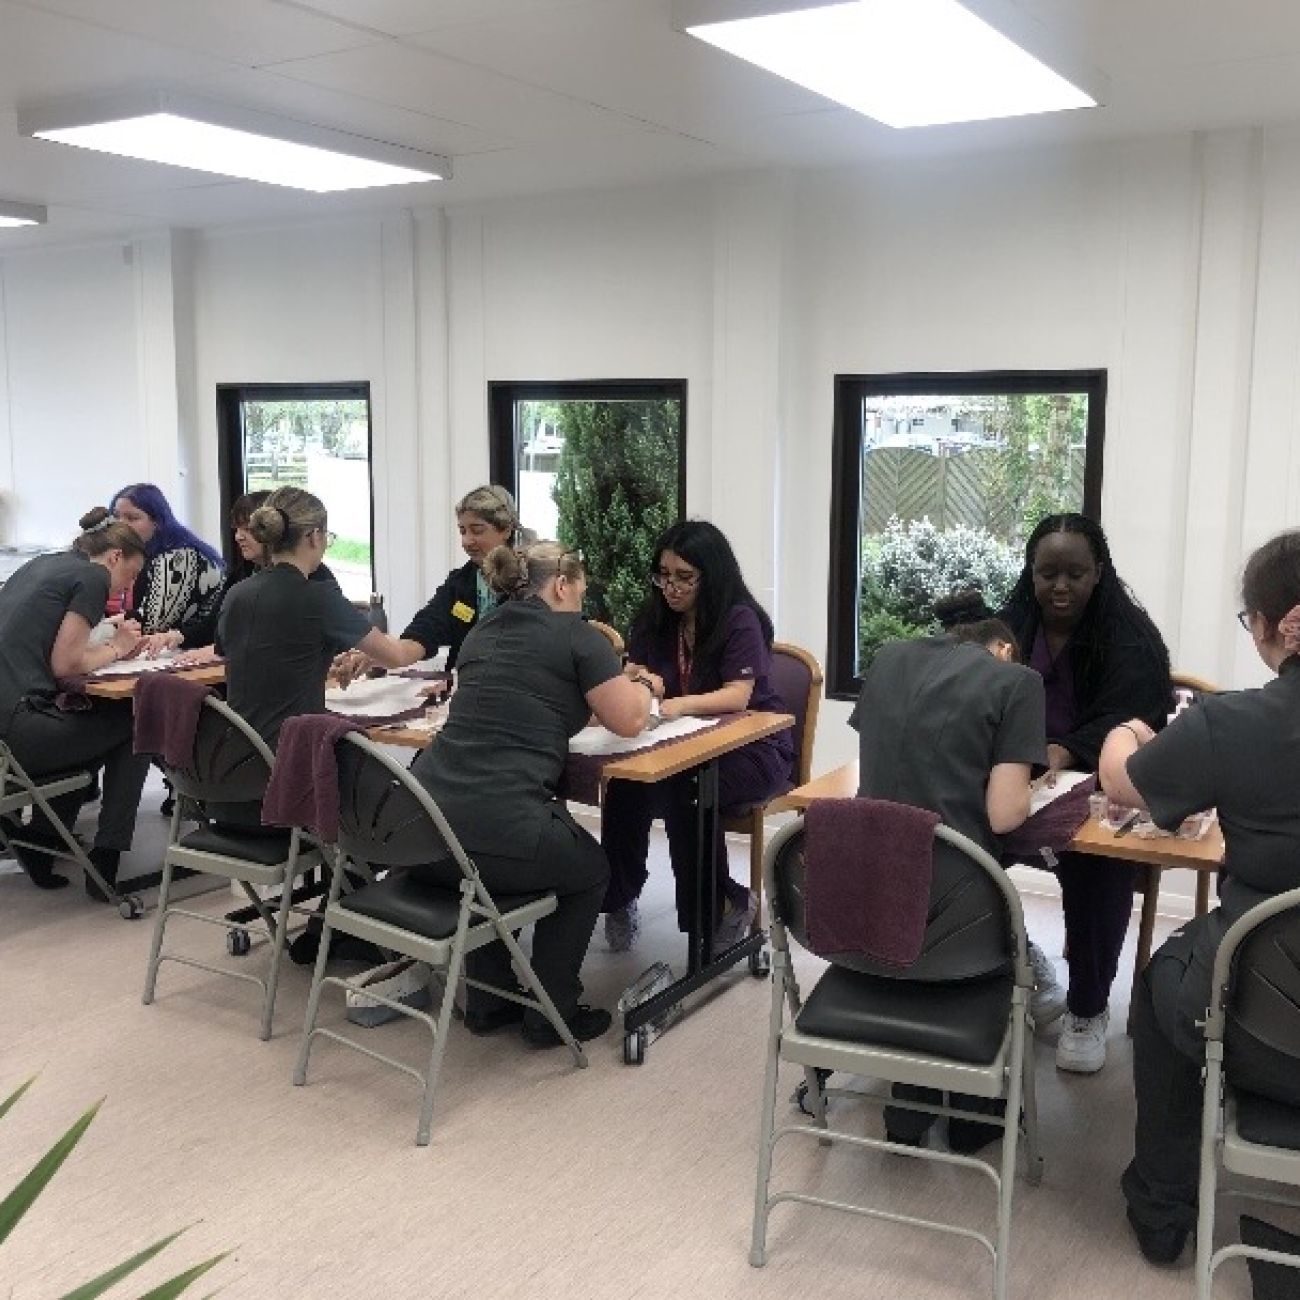 Learners pampering NHS staff in wellbeing centre